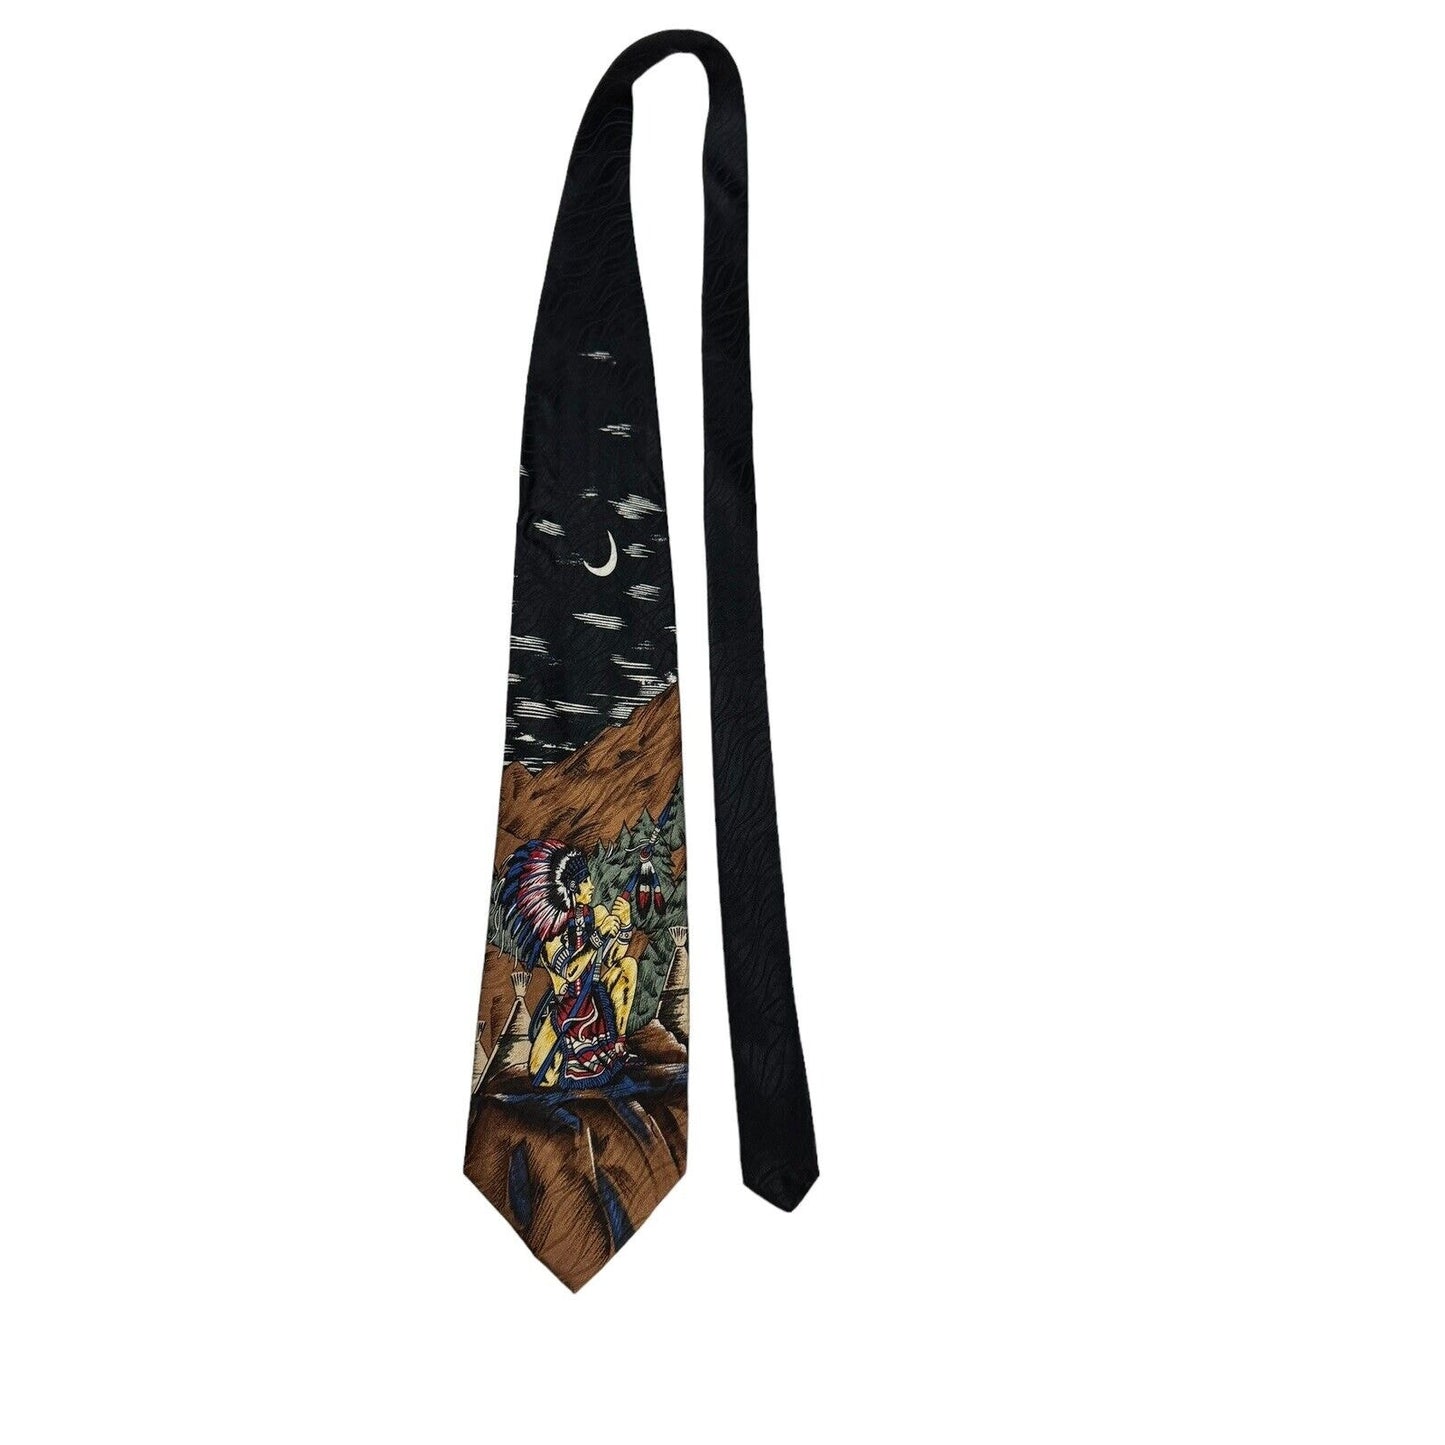 Vintage Native American Indians Trees Mountain Novelty Necktie